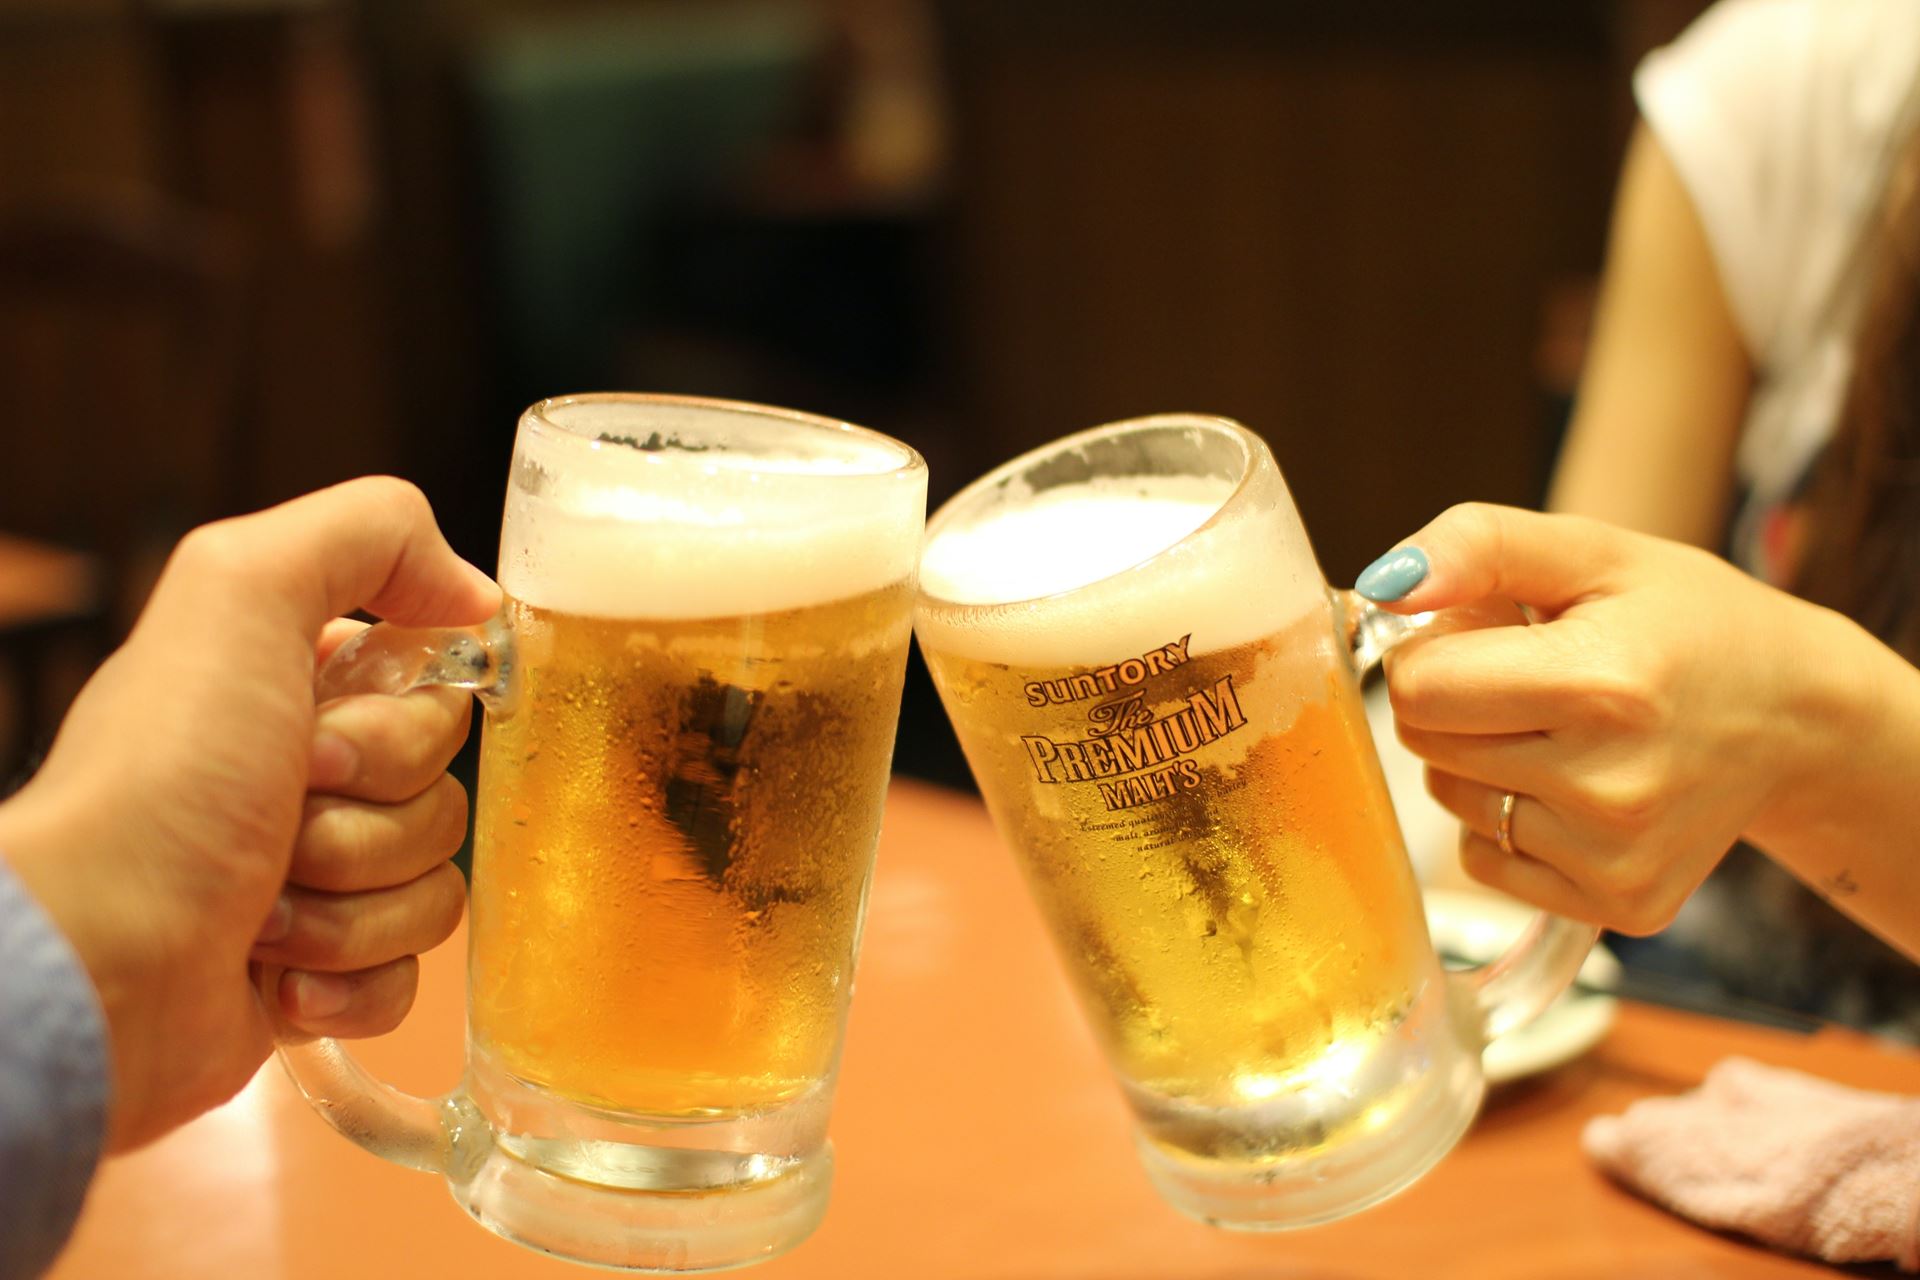 Two beer glasses being clinked together